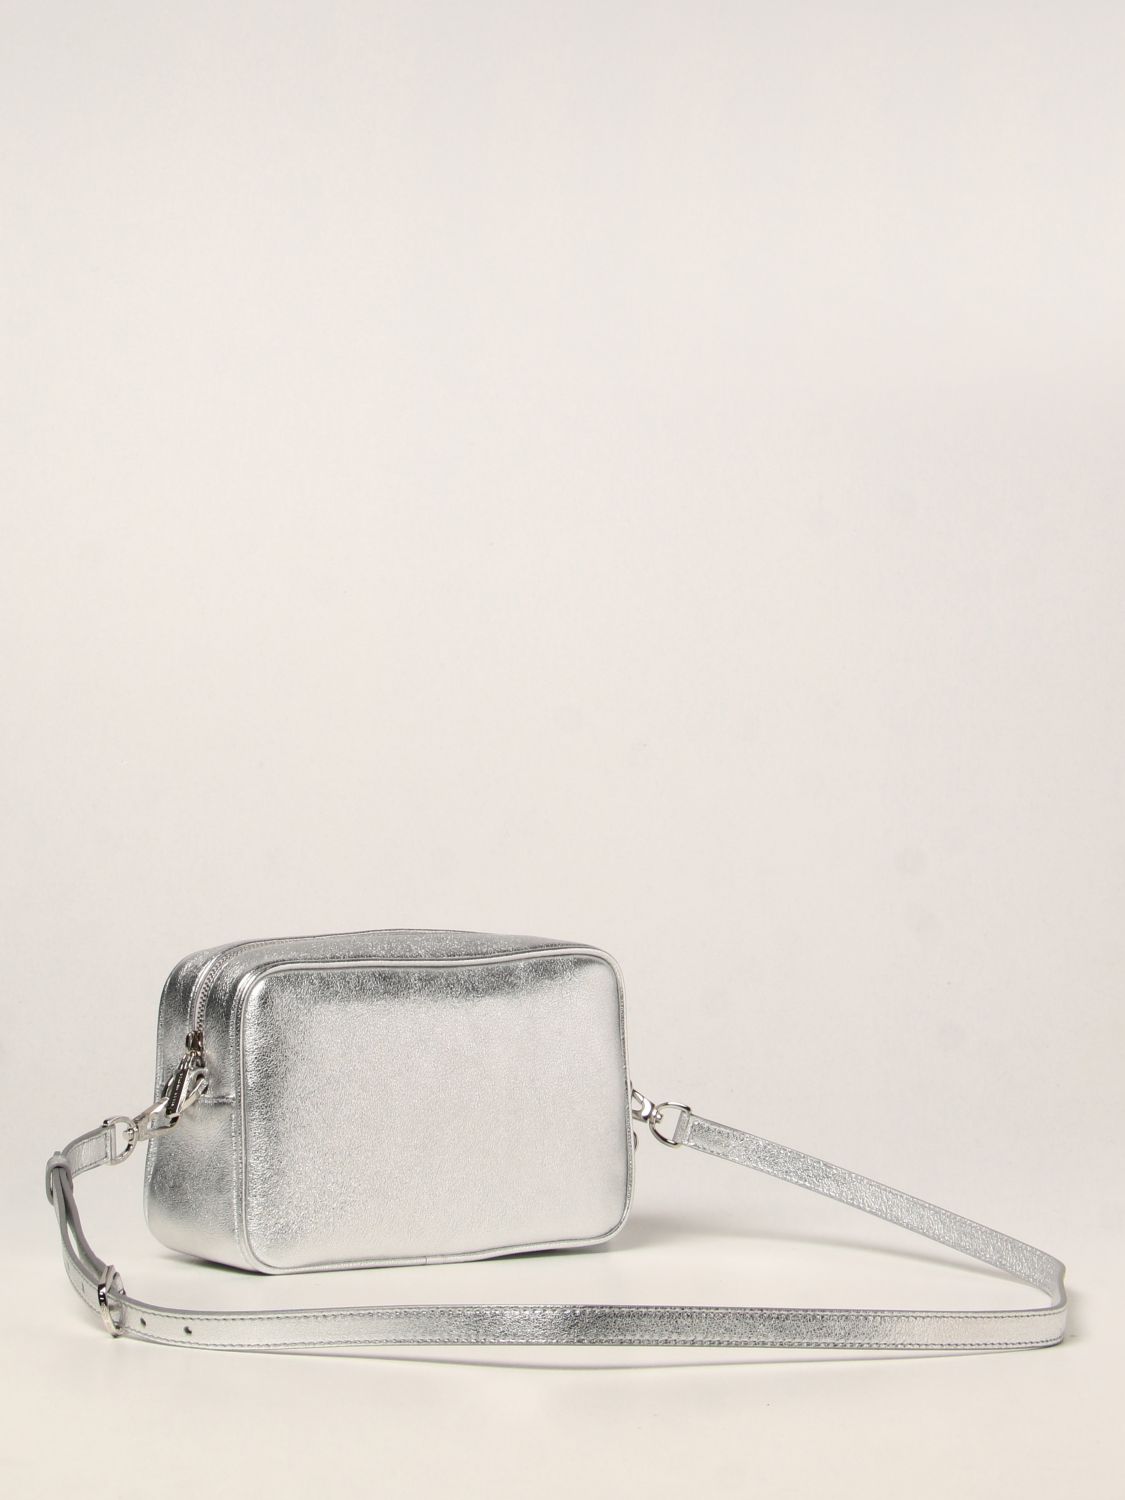 GOLDEN GOOSE: Star bag in laminated leather and glitter - Silver ...